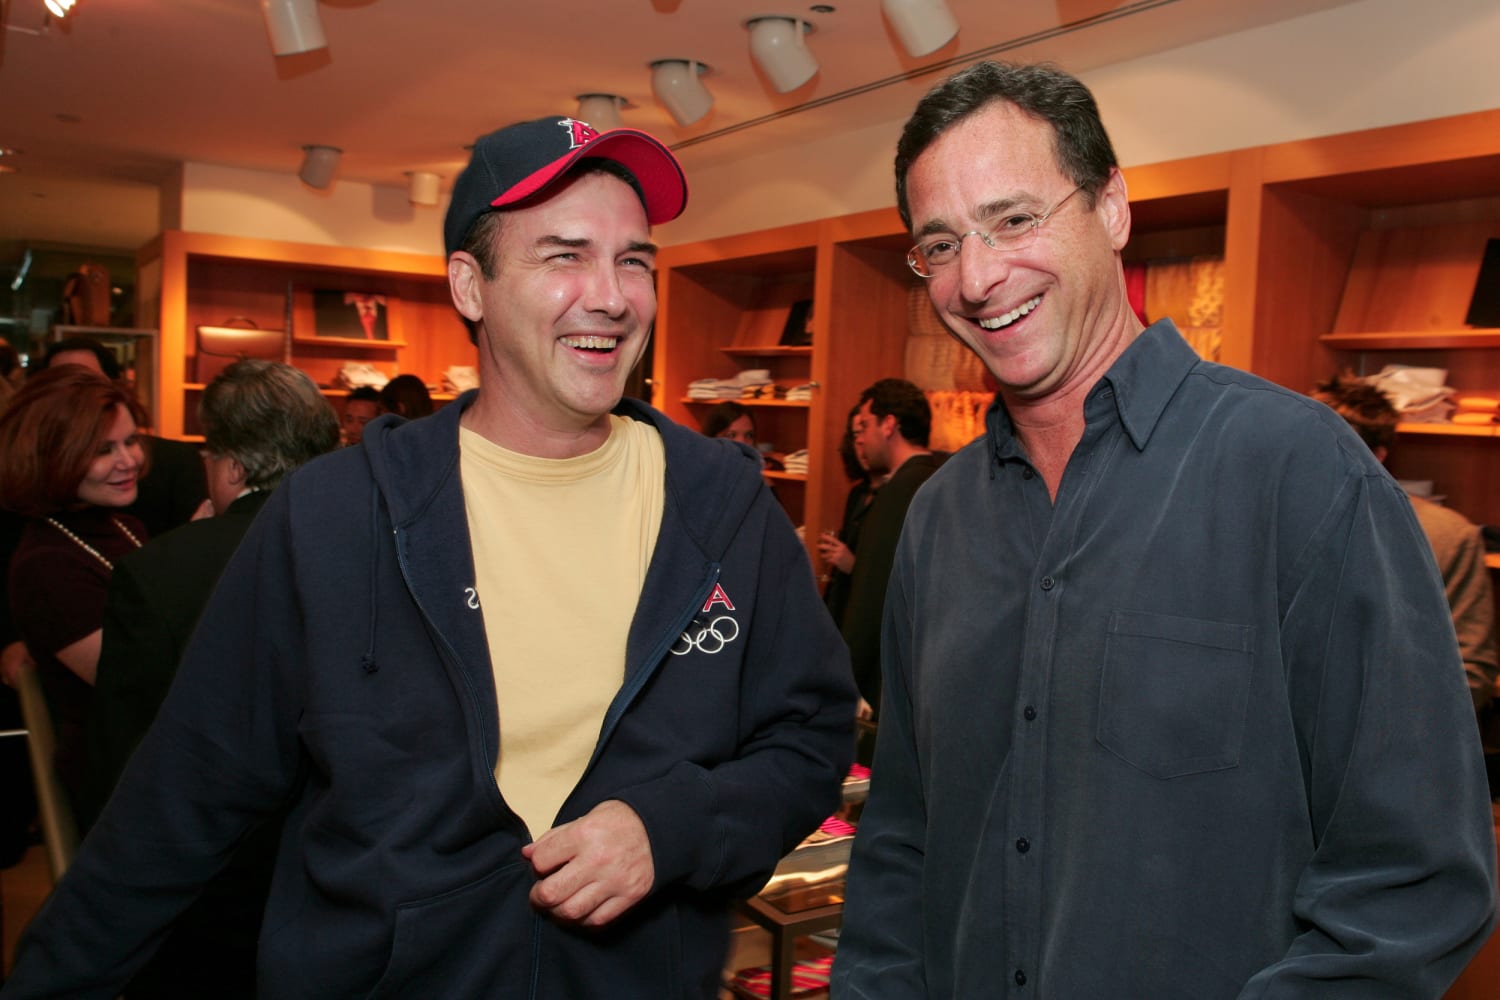 The decades-long friendship and collaboration between Bob Saget and Norm Macdonald